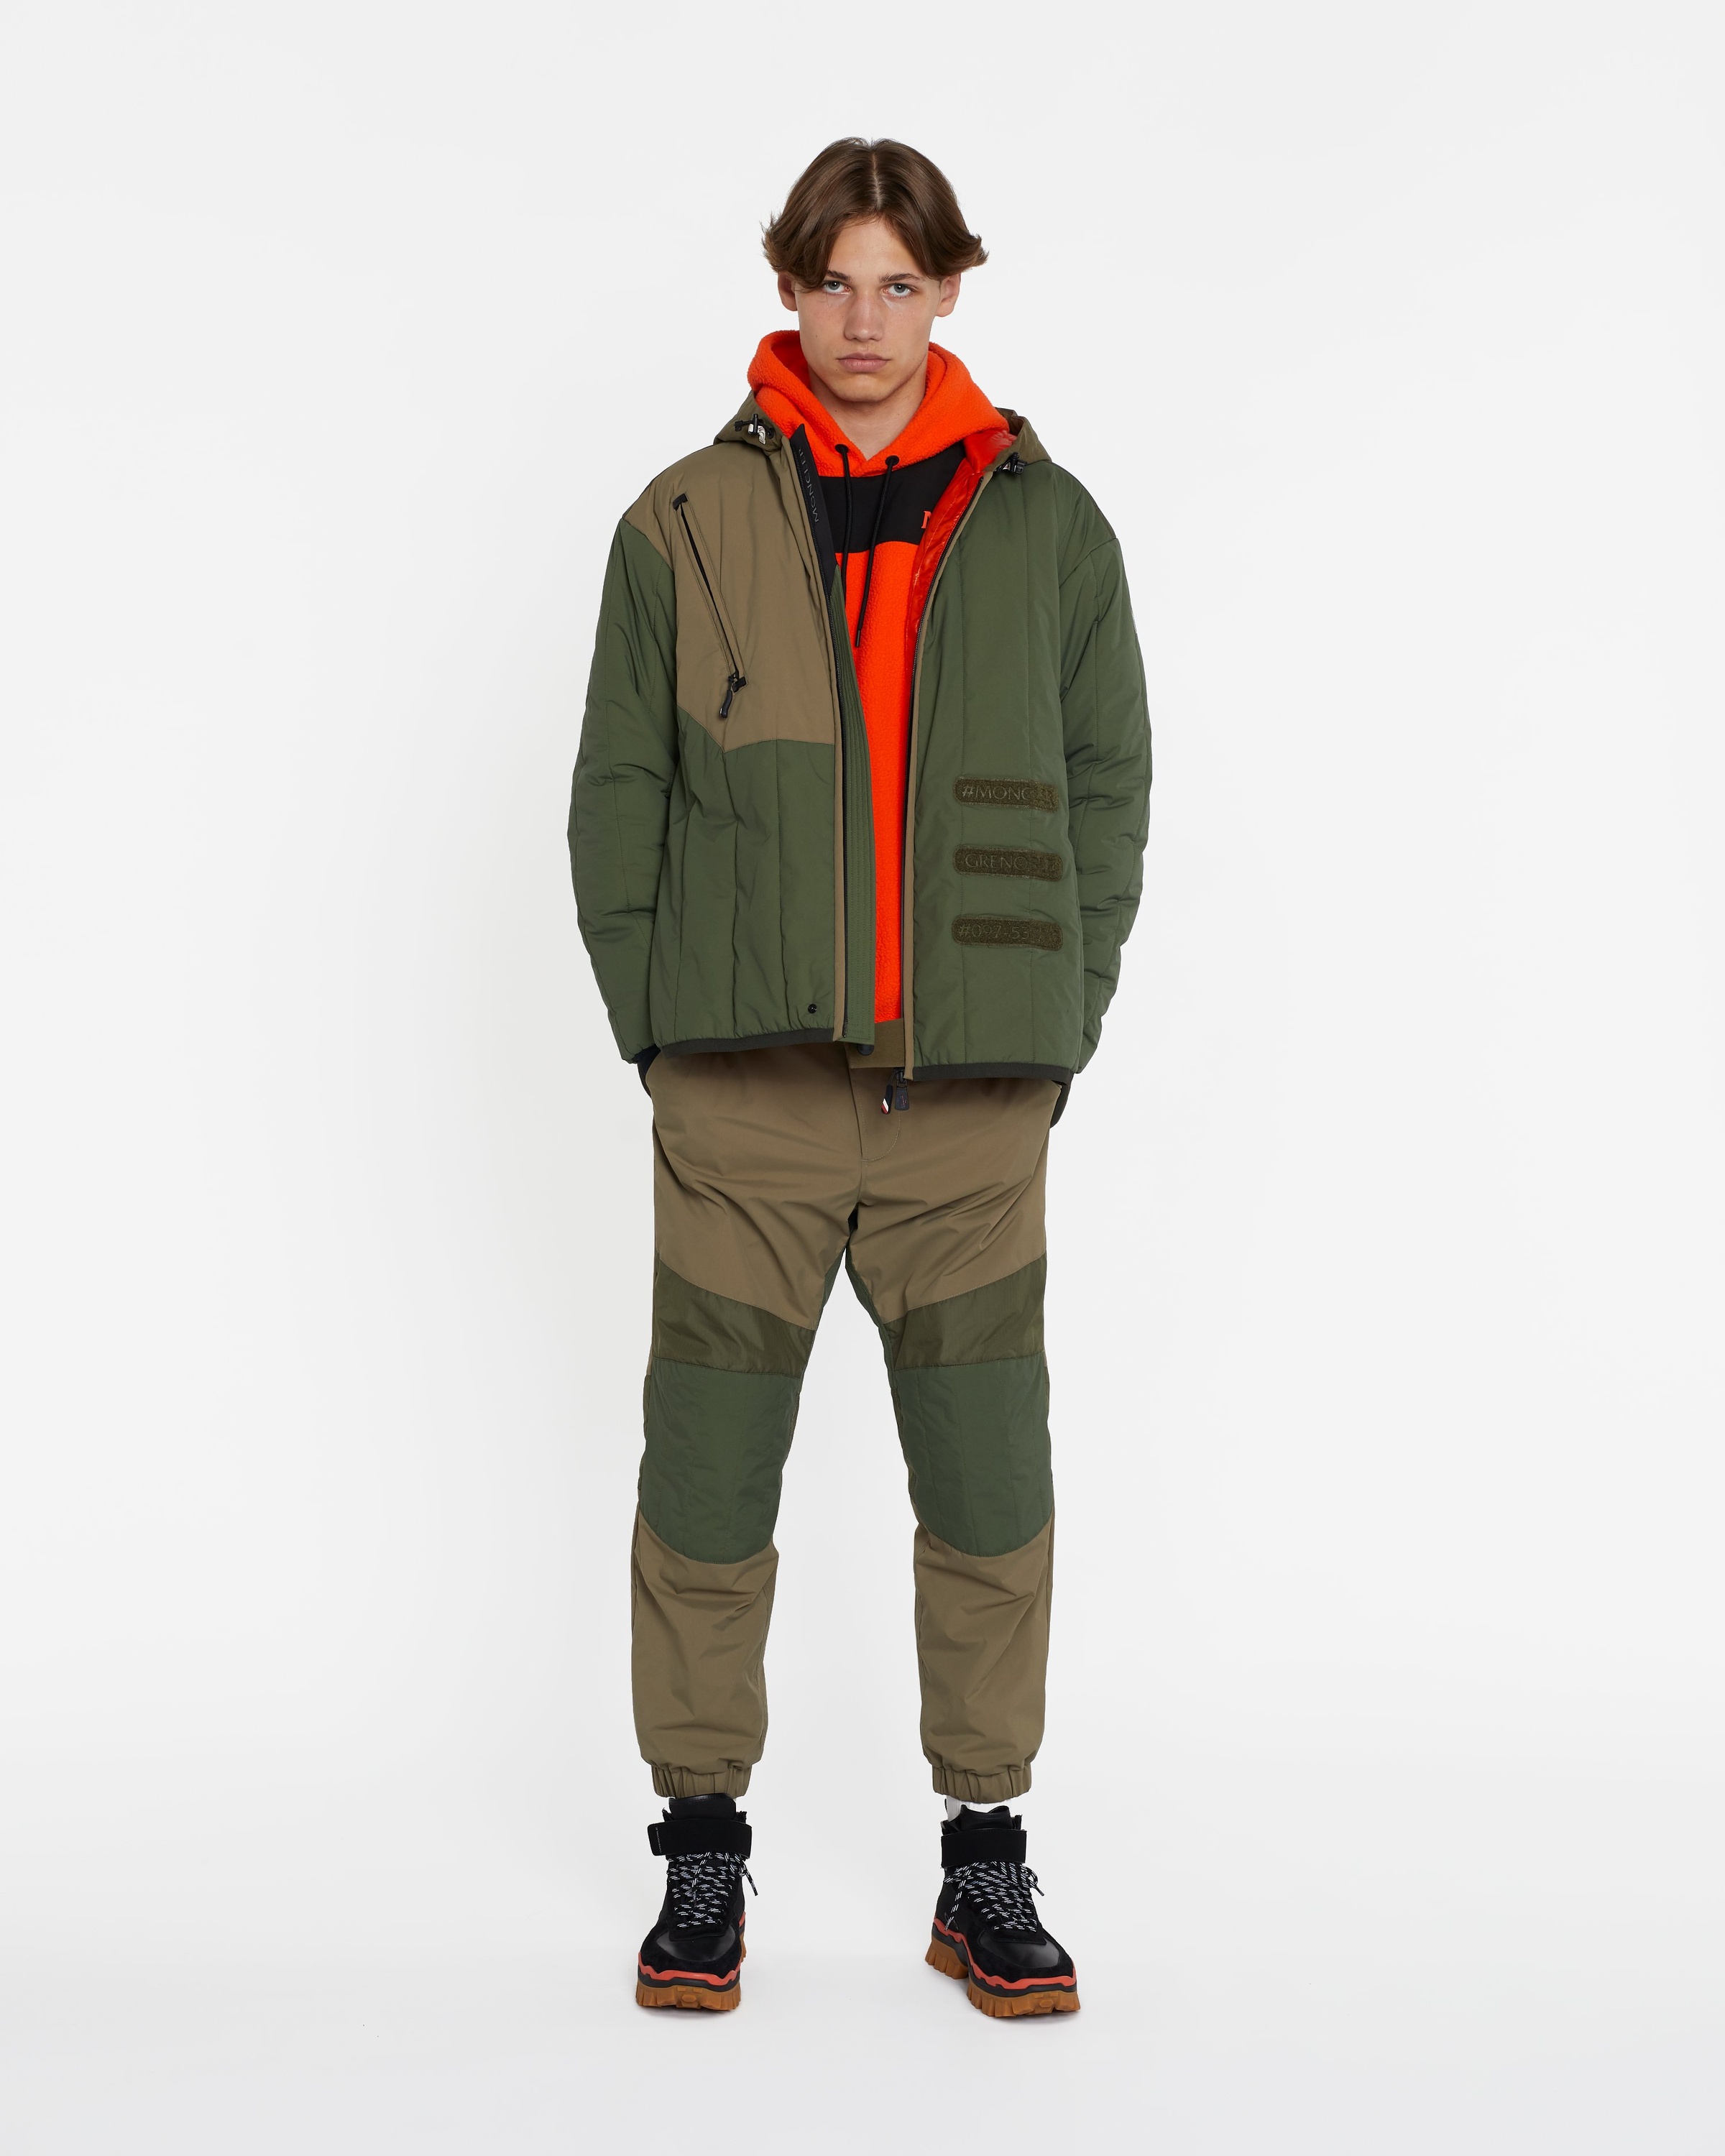 Moncler Genius – Recycled Indren Jacket - Outerwear - Green - Image 4